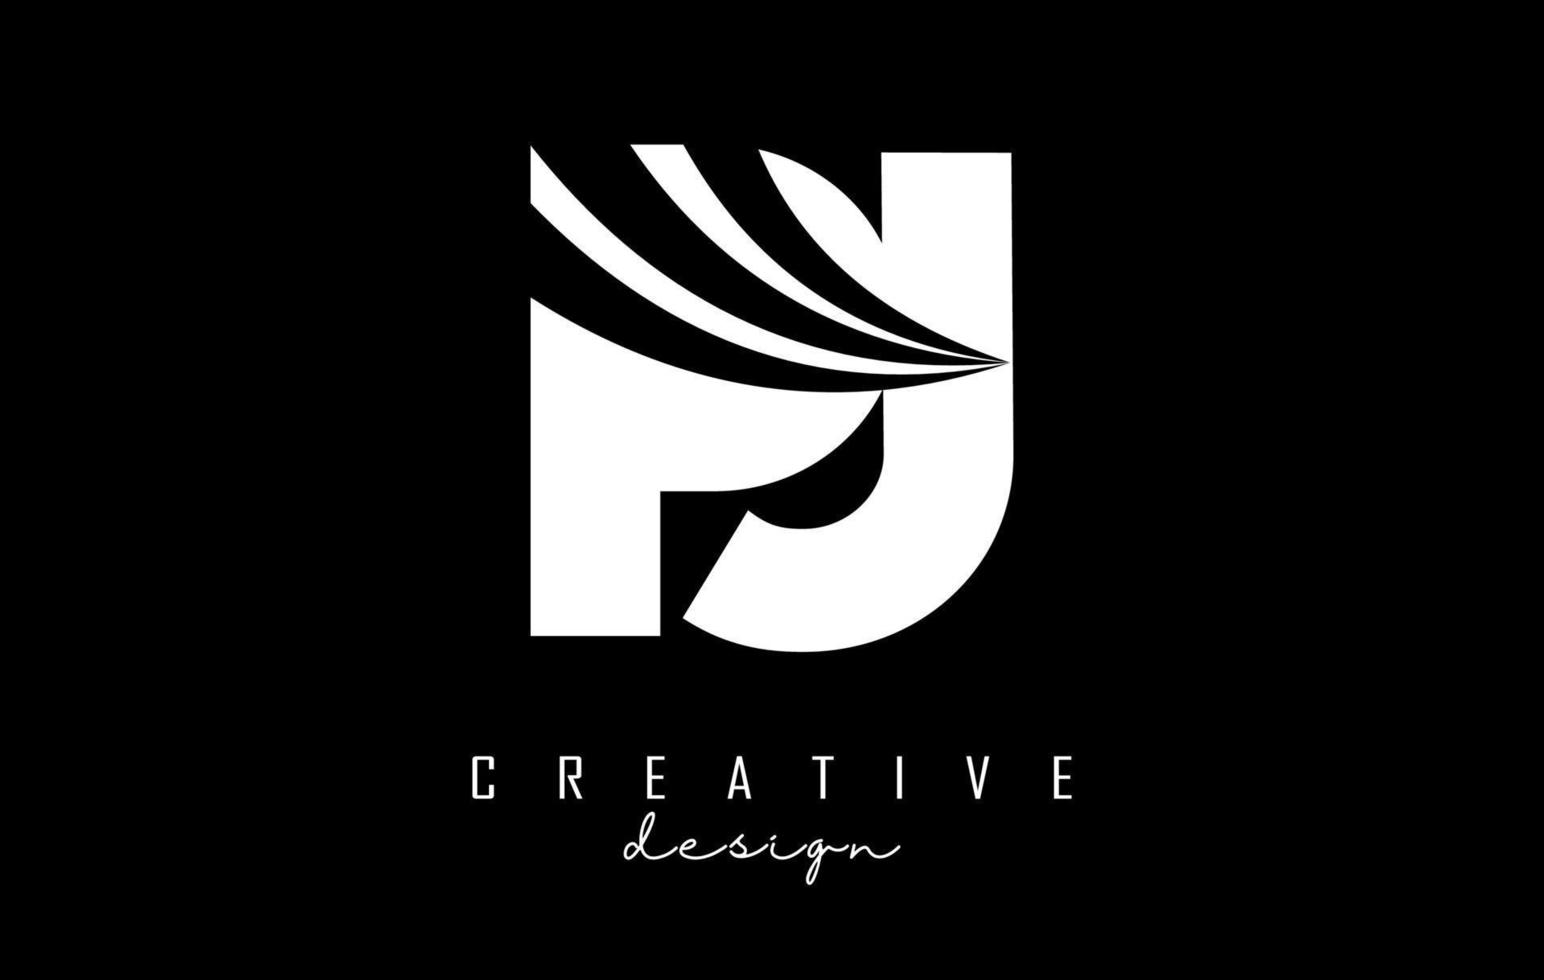 Creative white letters Pj p j logo with leading lines and road concept design. Letters with geometric design. vector